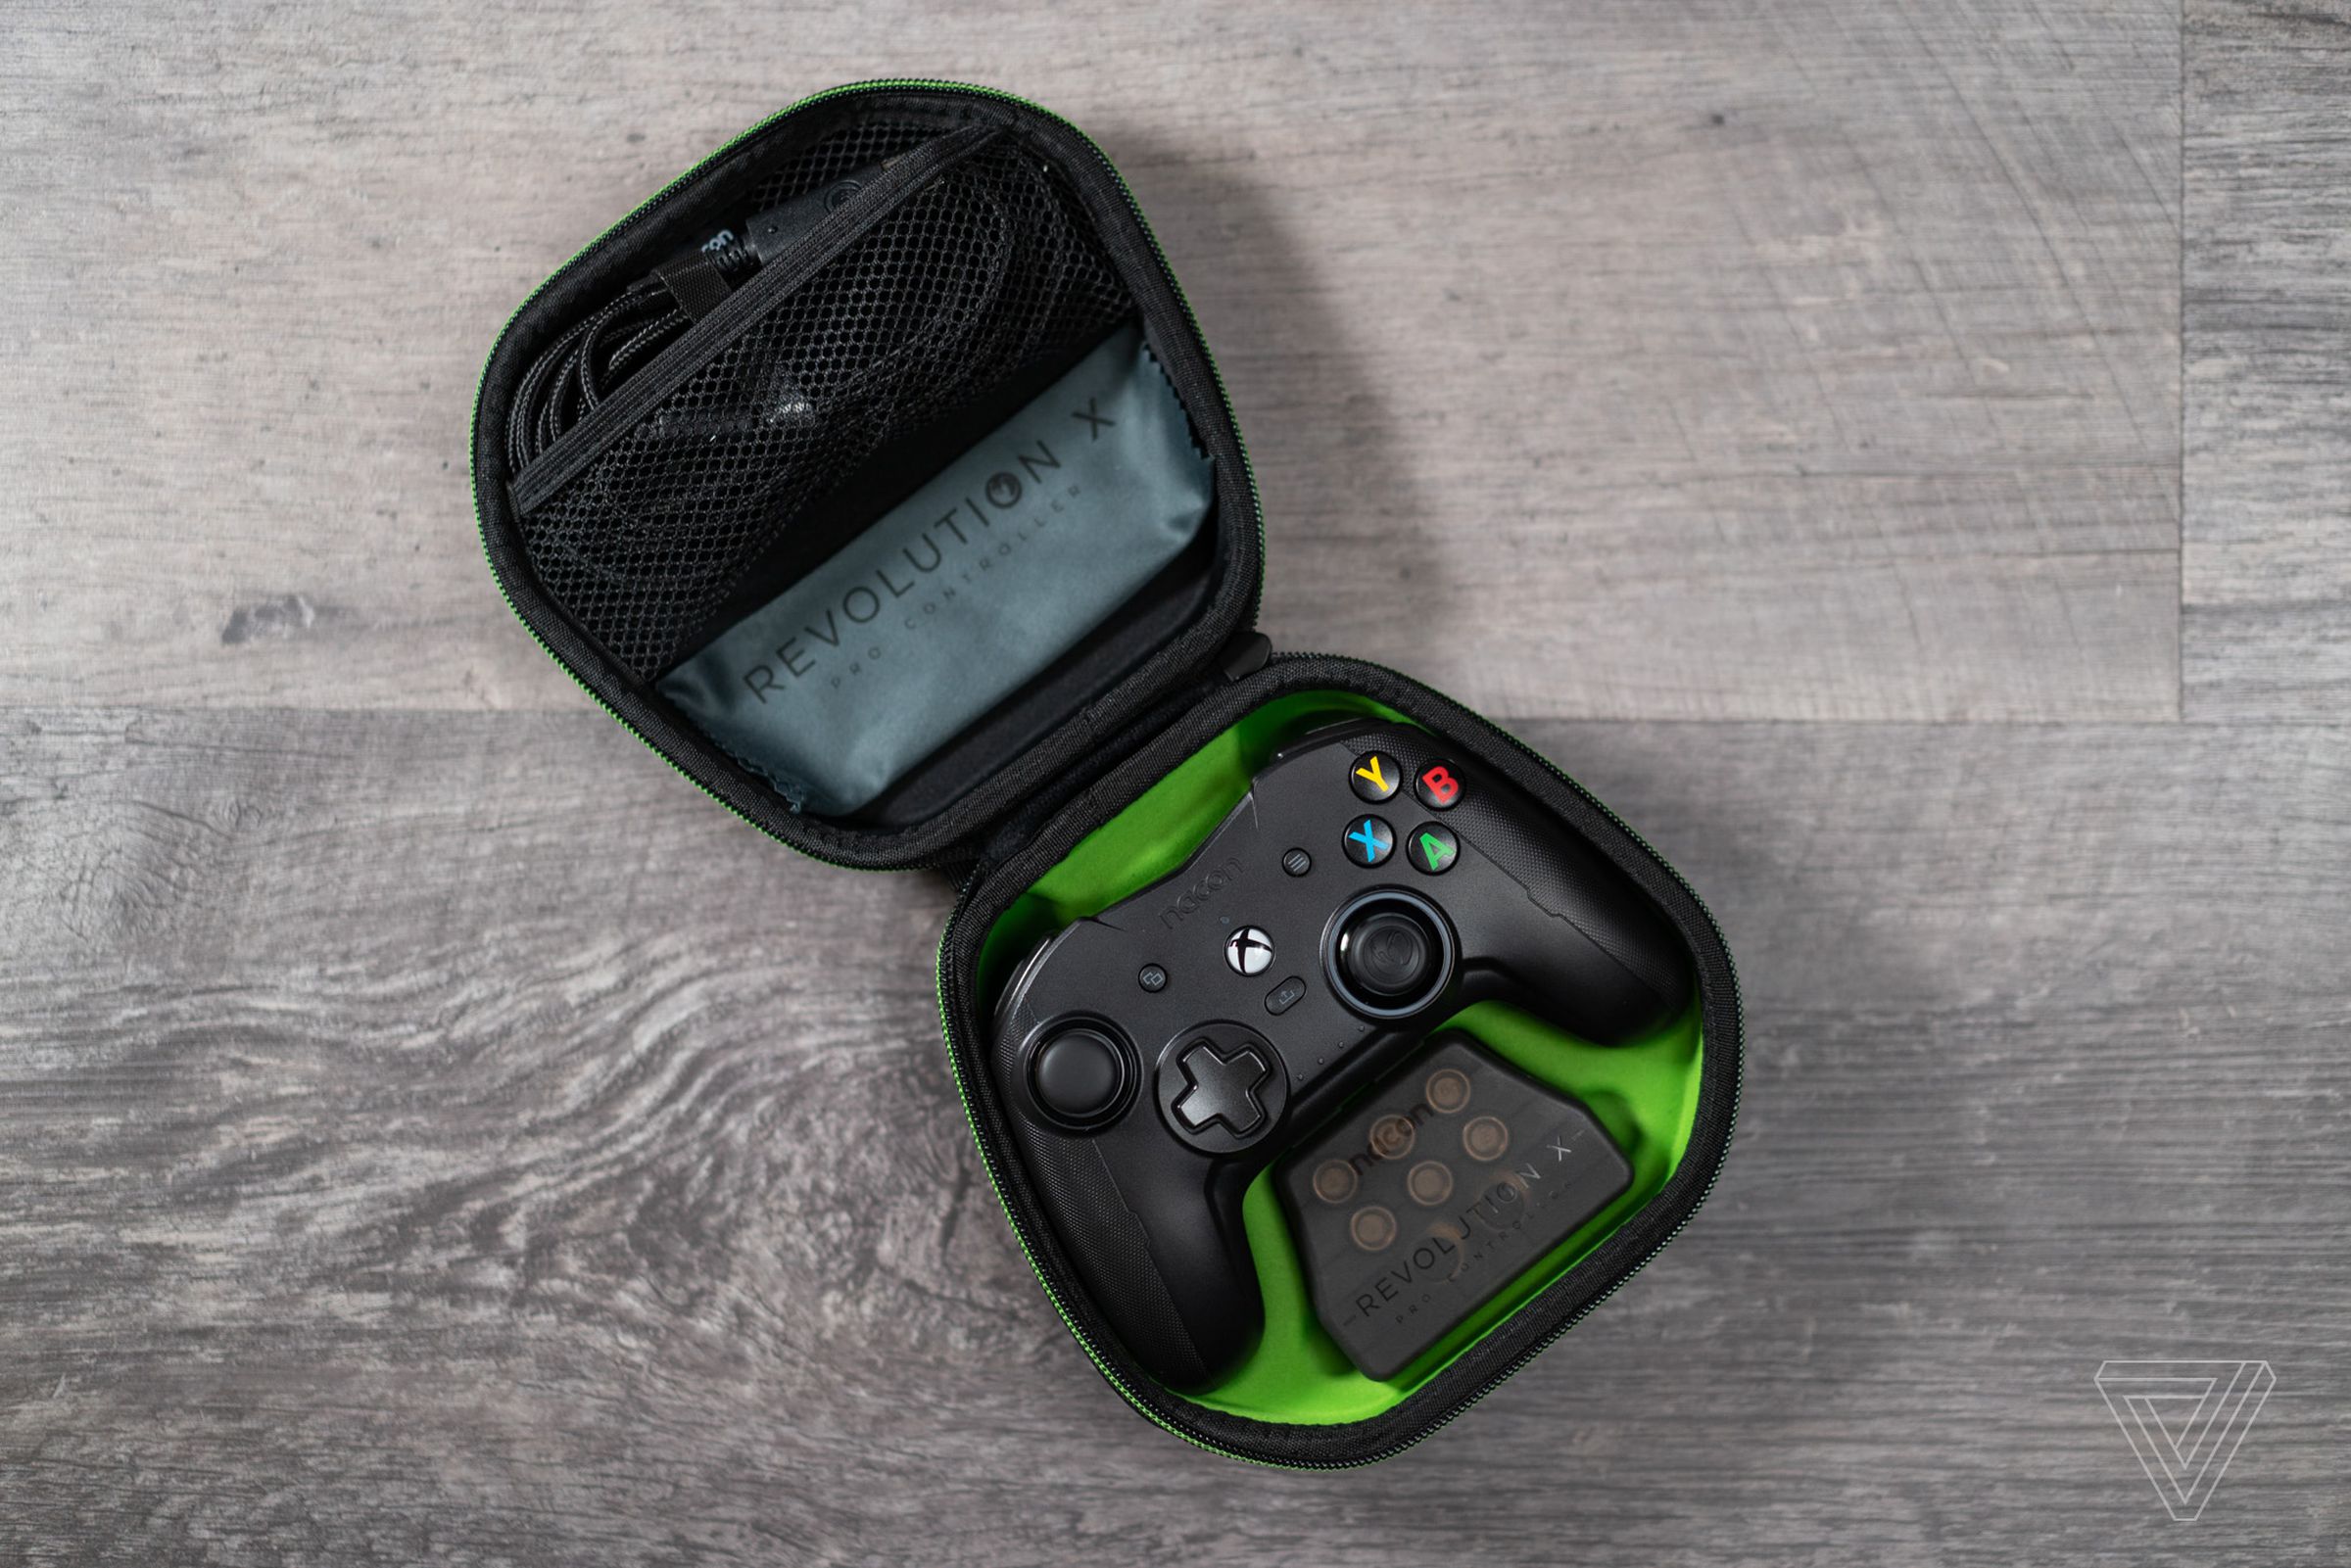 The controller, cable, stick tops, grip weights, and stick rings are all packaged in the included zipper case.